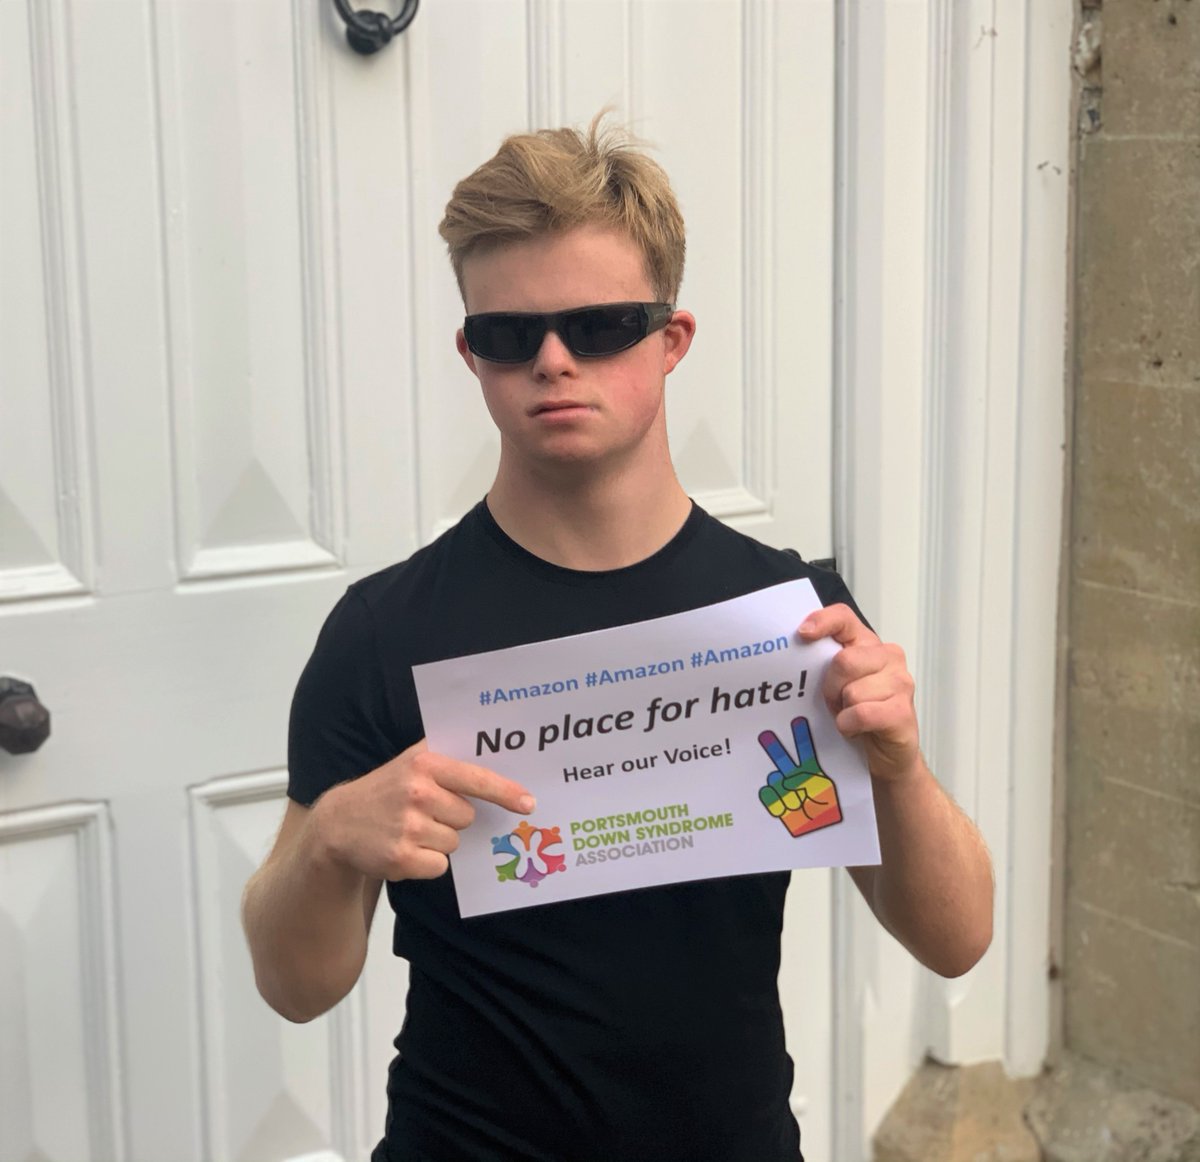 We call on @Amazon to stop selling #Hatewear which discriminates against people with Down syndrome. Please RT our message to #Amazon #HearOurVoice #PortsmouthDSA #NoPlaceForHate @JustinTomlinson @stephenmorganmp @bbcsouthnews @itvmeridian @portsmouthnews @PONewshub @sandcpompey